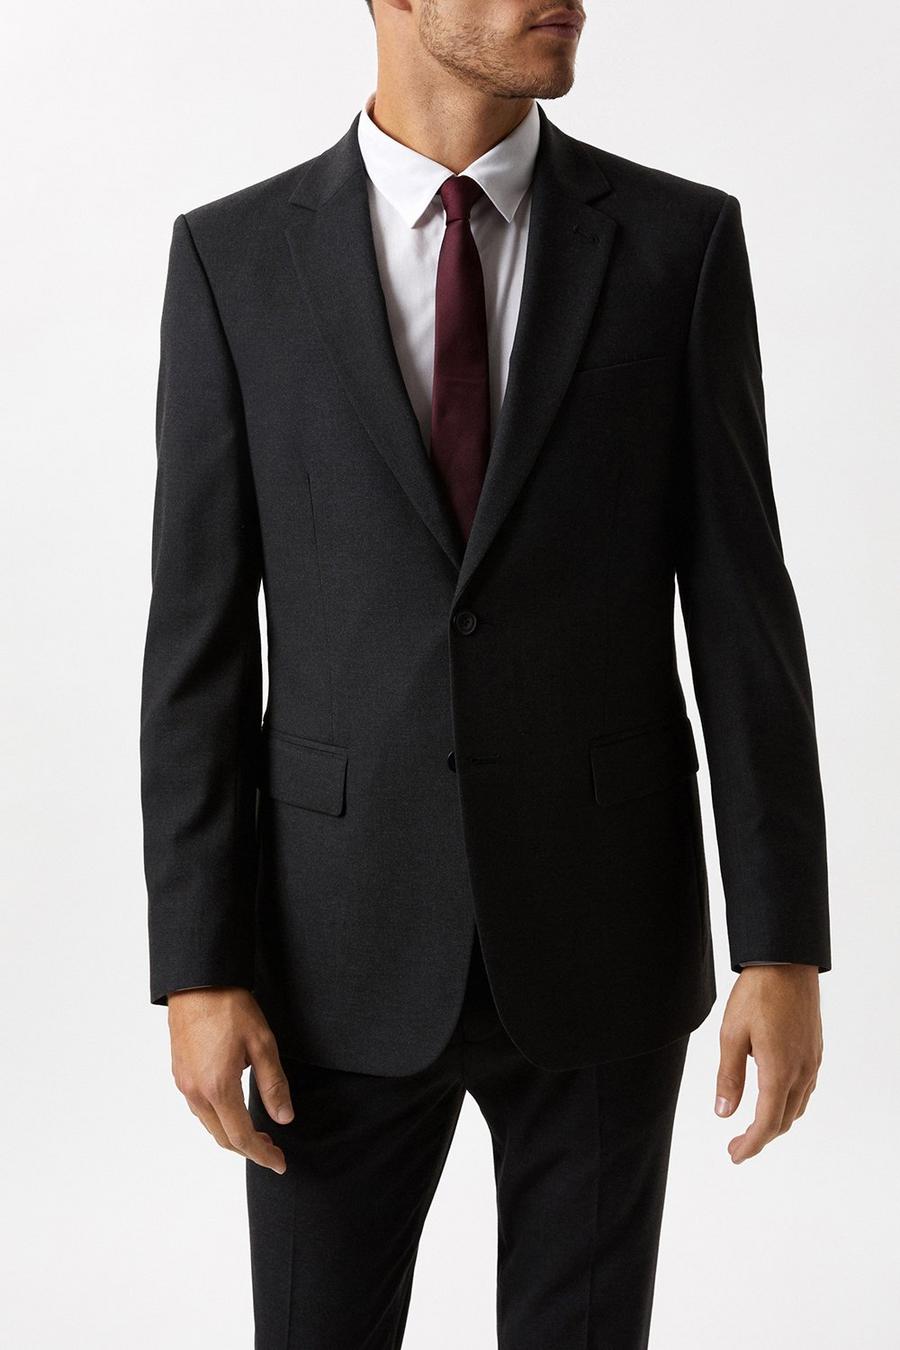 Plus And Tall Tailored Charcoal Essential Three-Piece Suit